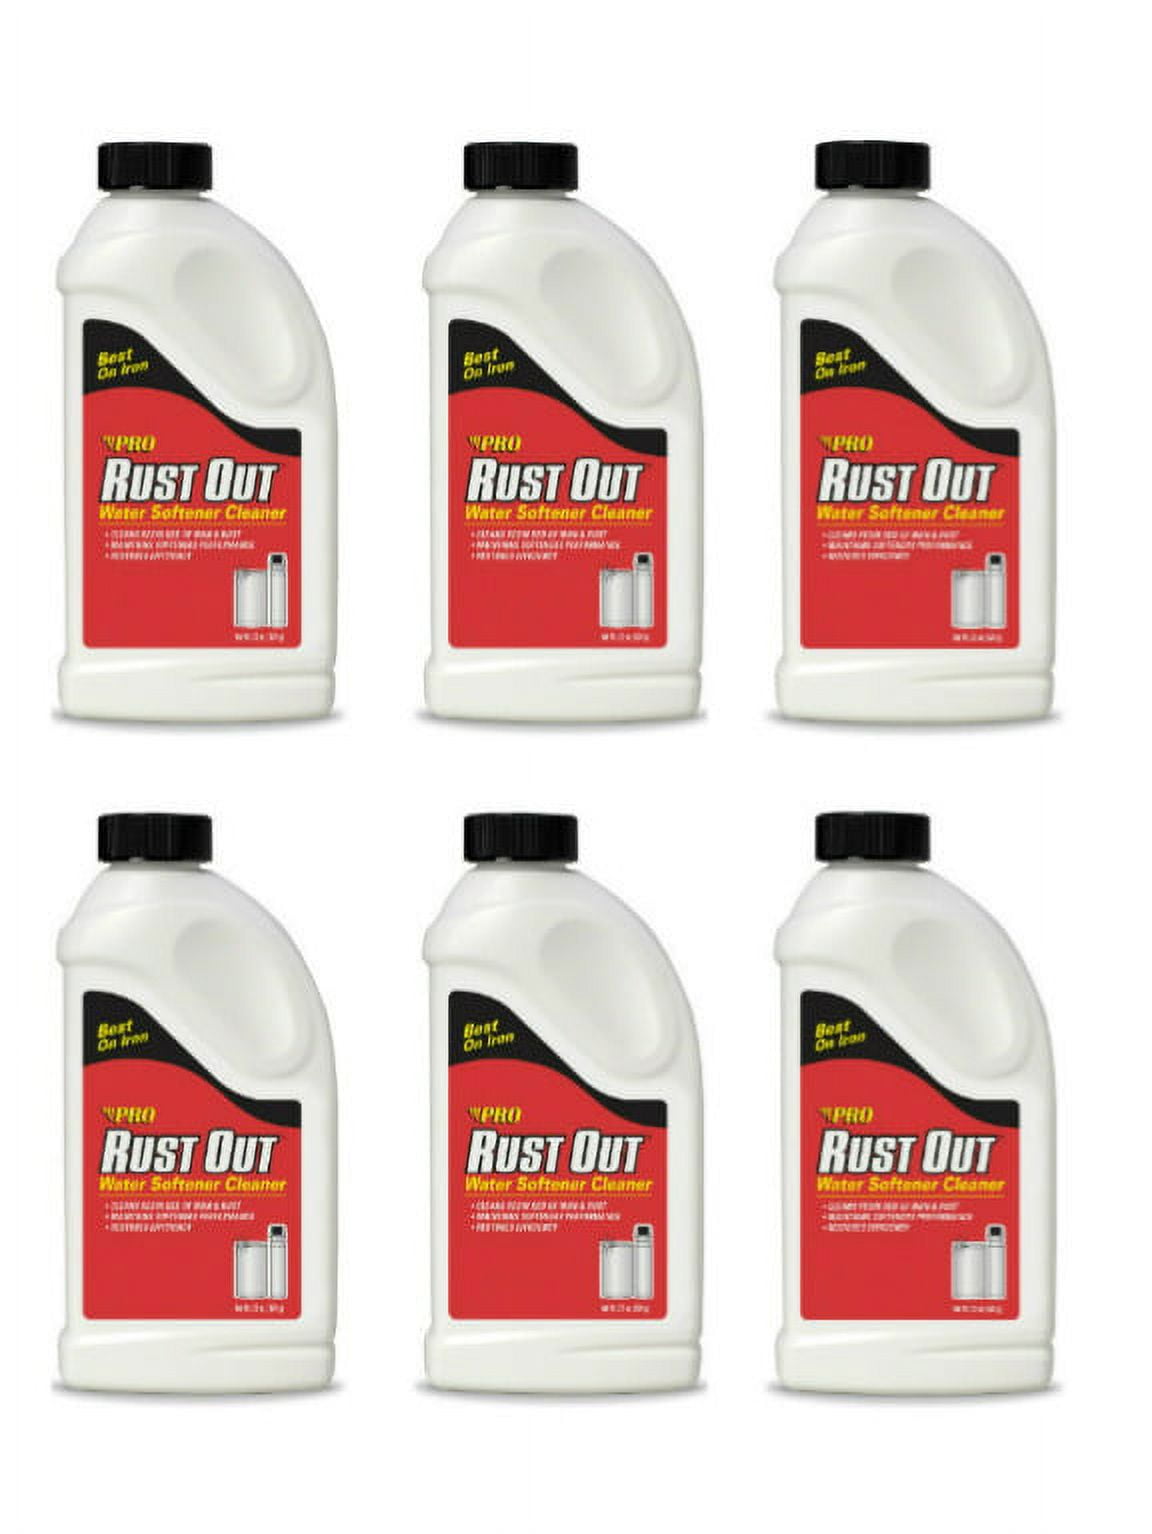 Pro Products Water Softener Cleaner,Liquid Resin RK32N